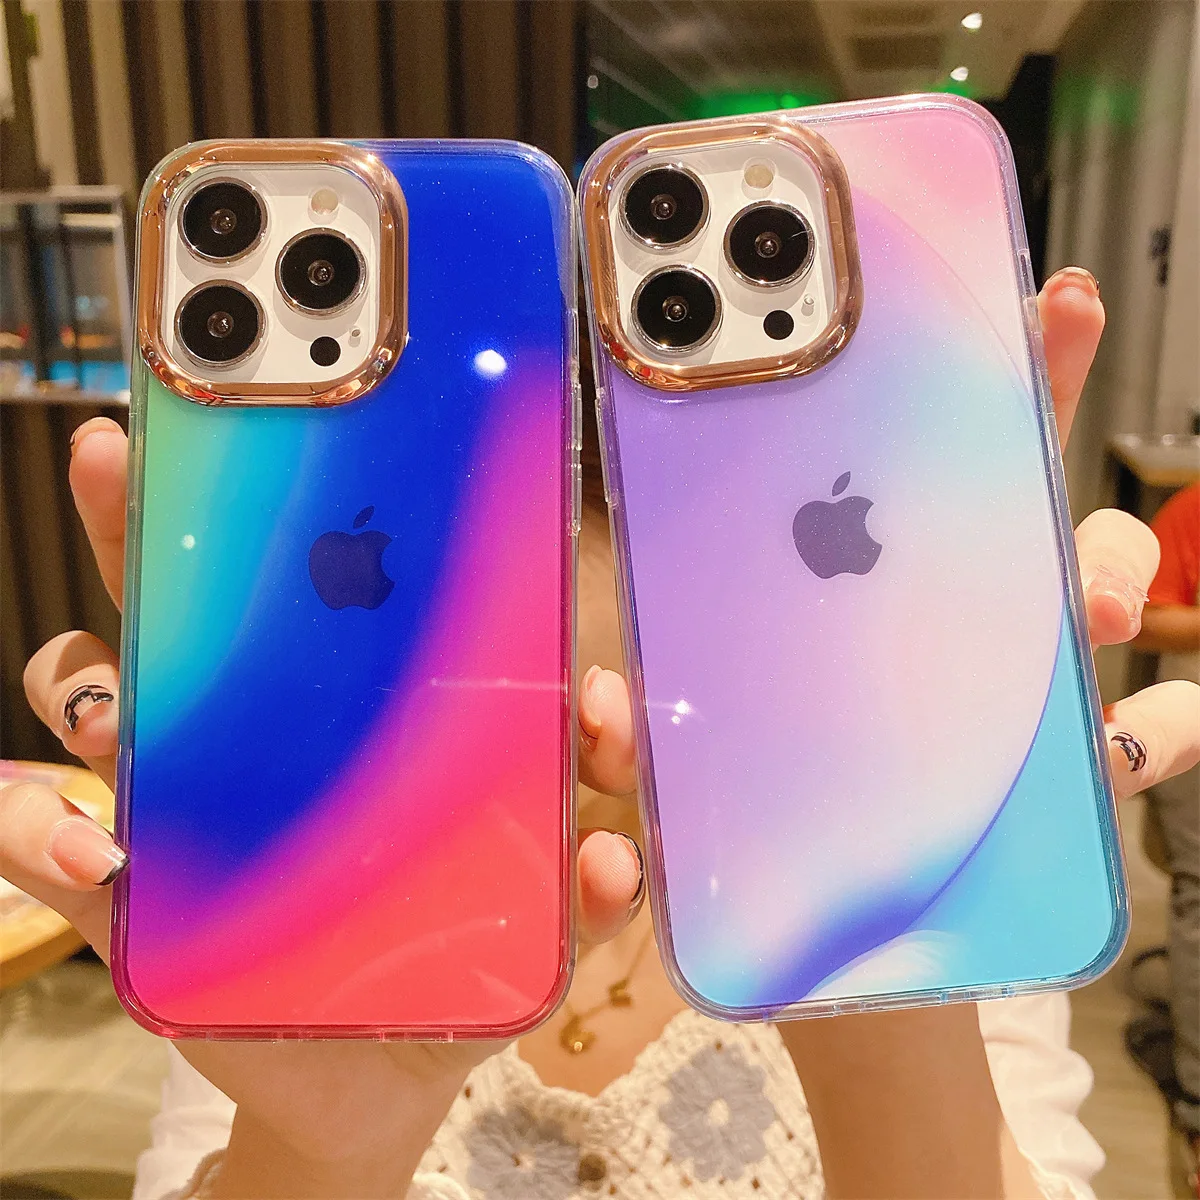 

Gradient Color Rainbow Gold Electroplating Bling Glitter Phone Case For iPhone 13 12 11 Pro Max X XR XS Max Fundas De Movil, Pink, blue, purple, gradient blue, gradient powder,